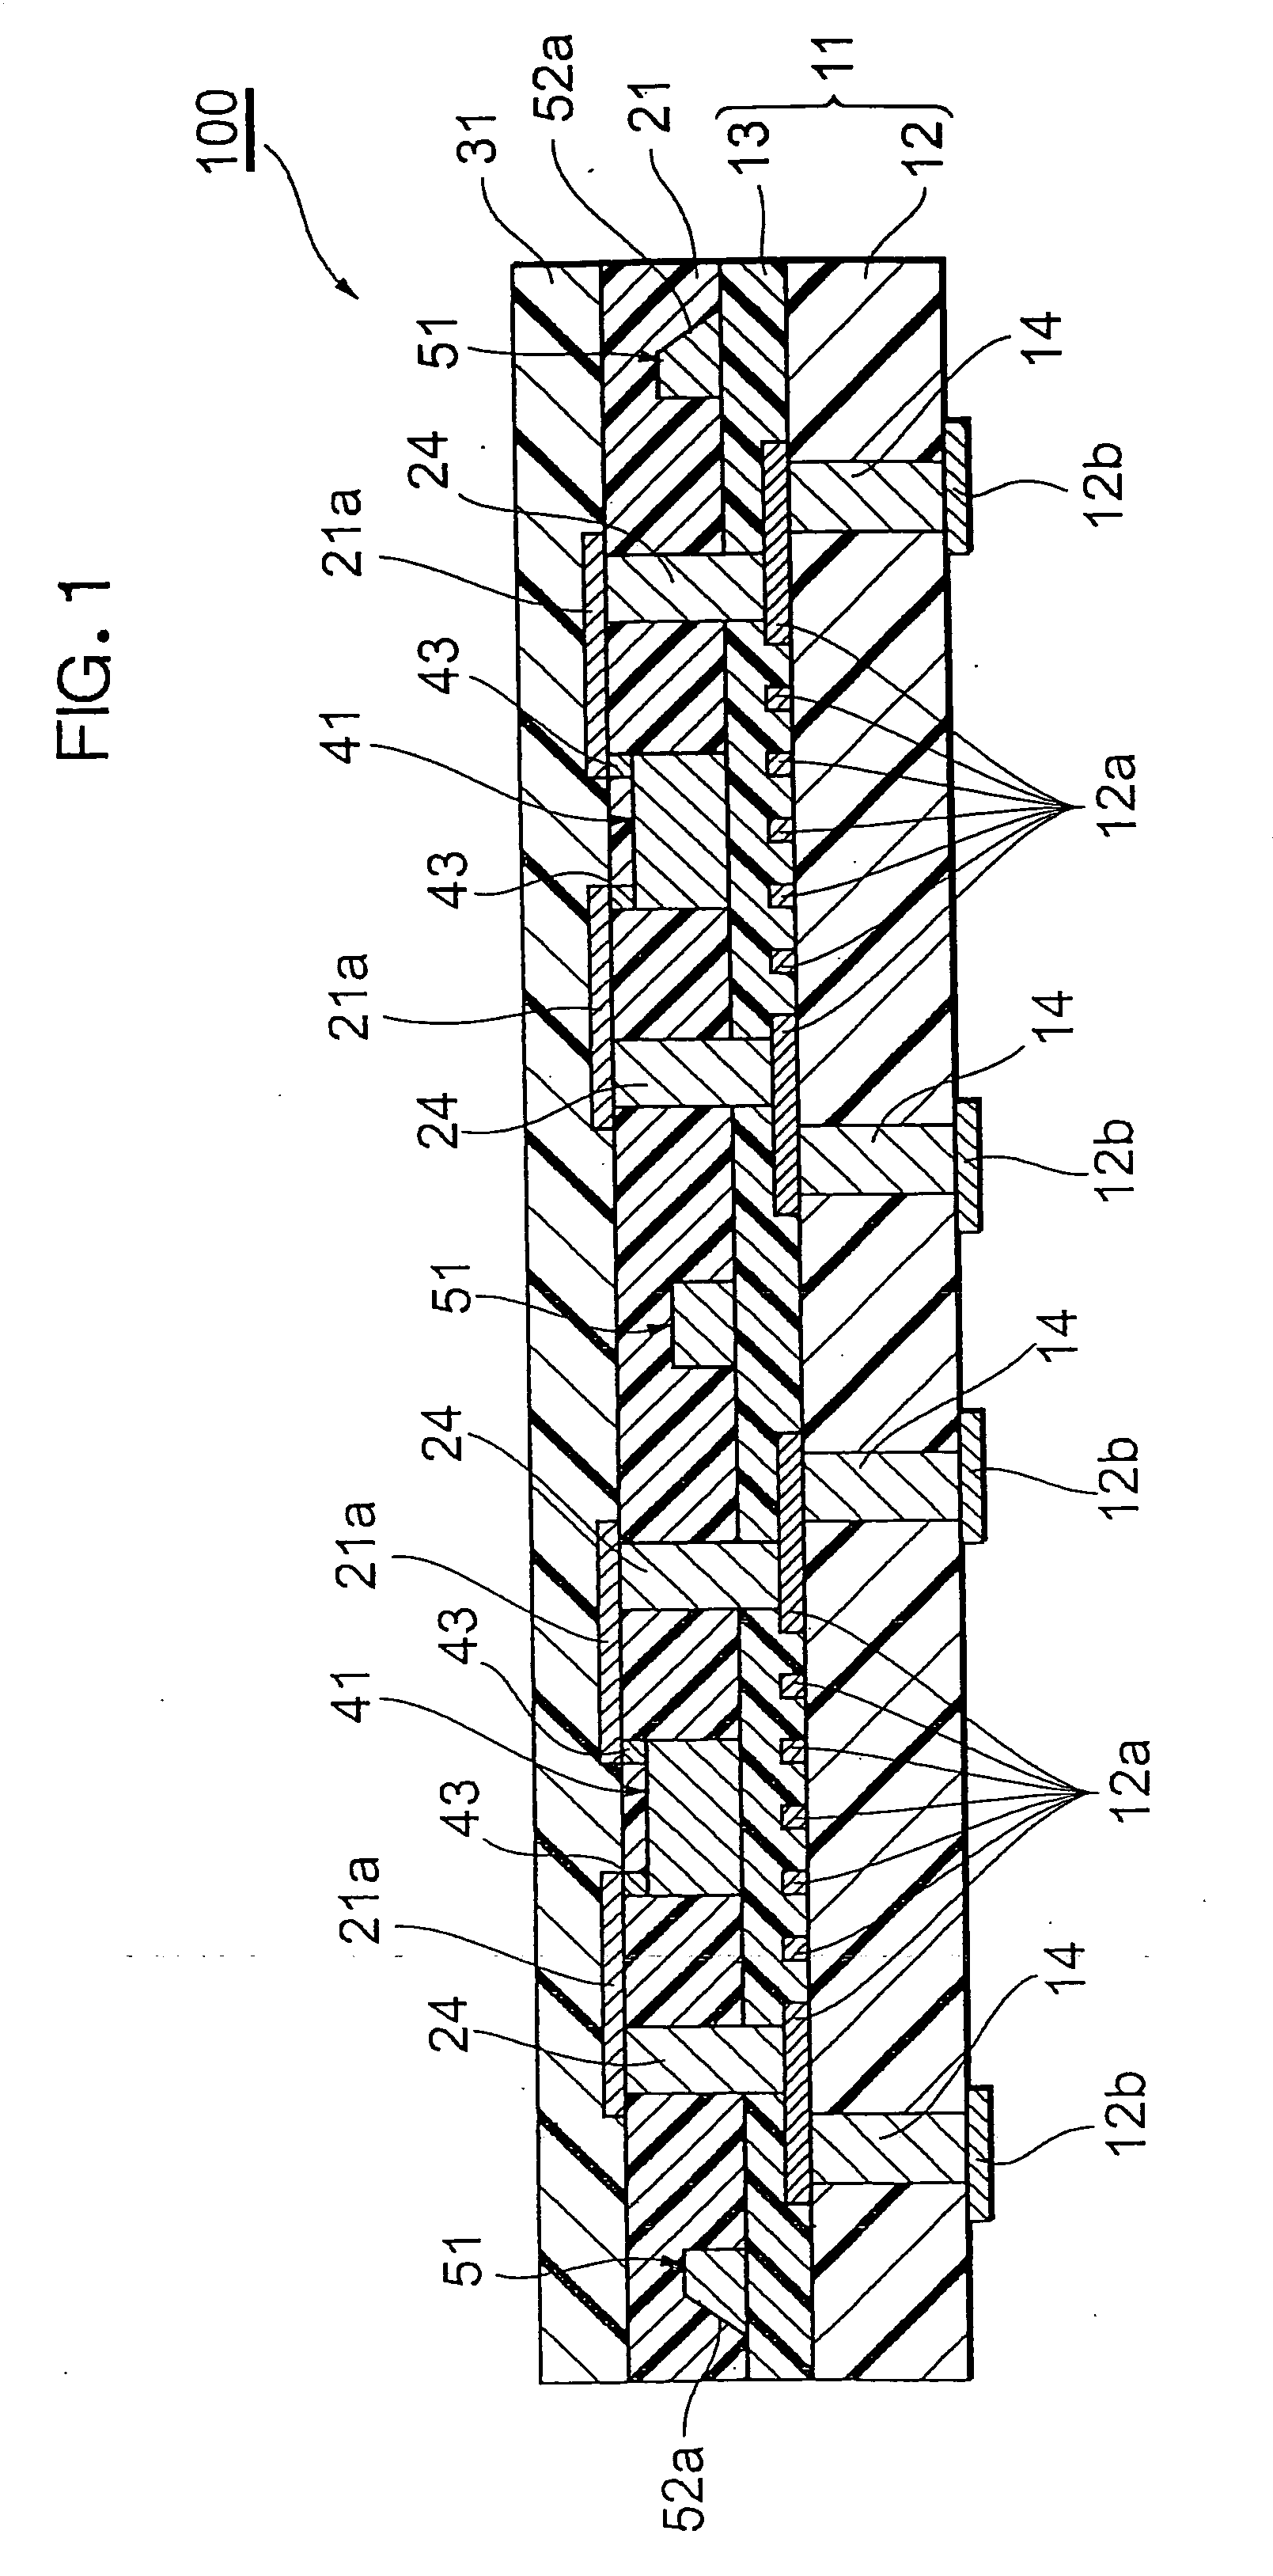 Electronic component-embedded board and method of manufacturing the same